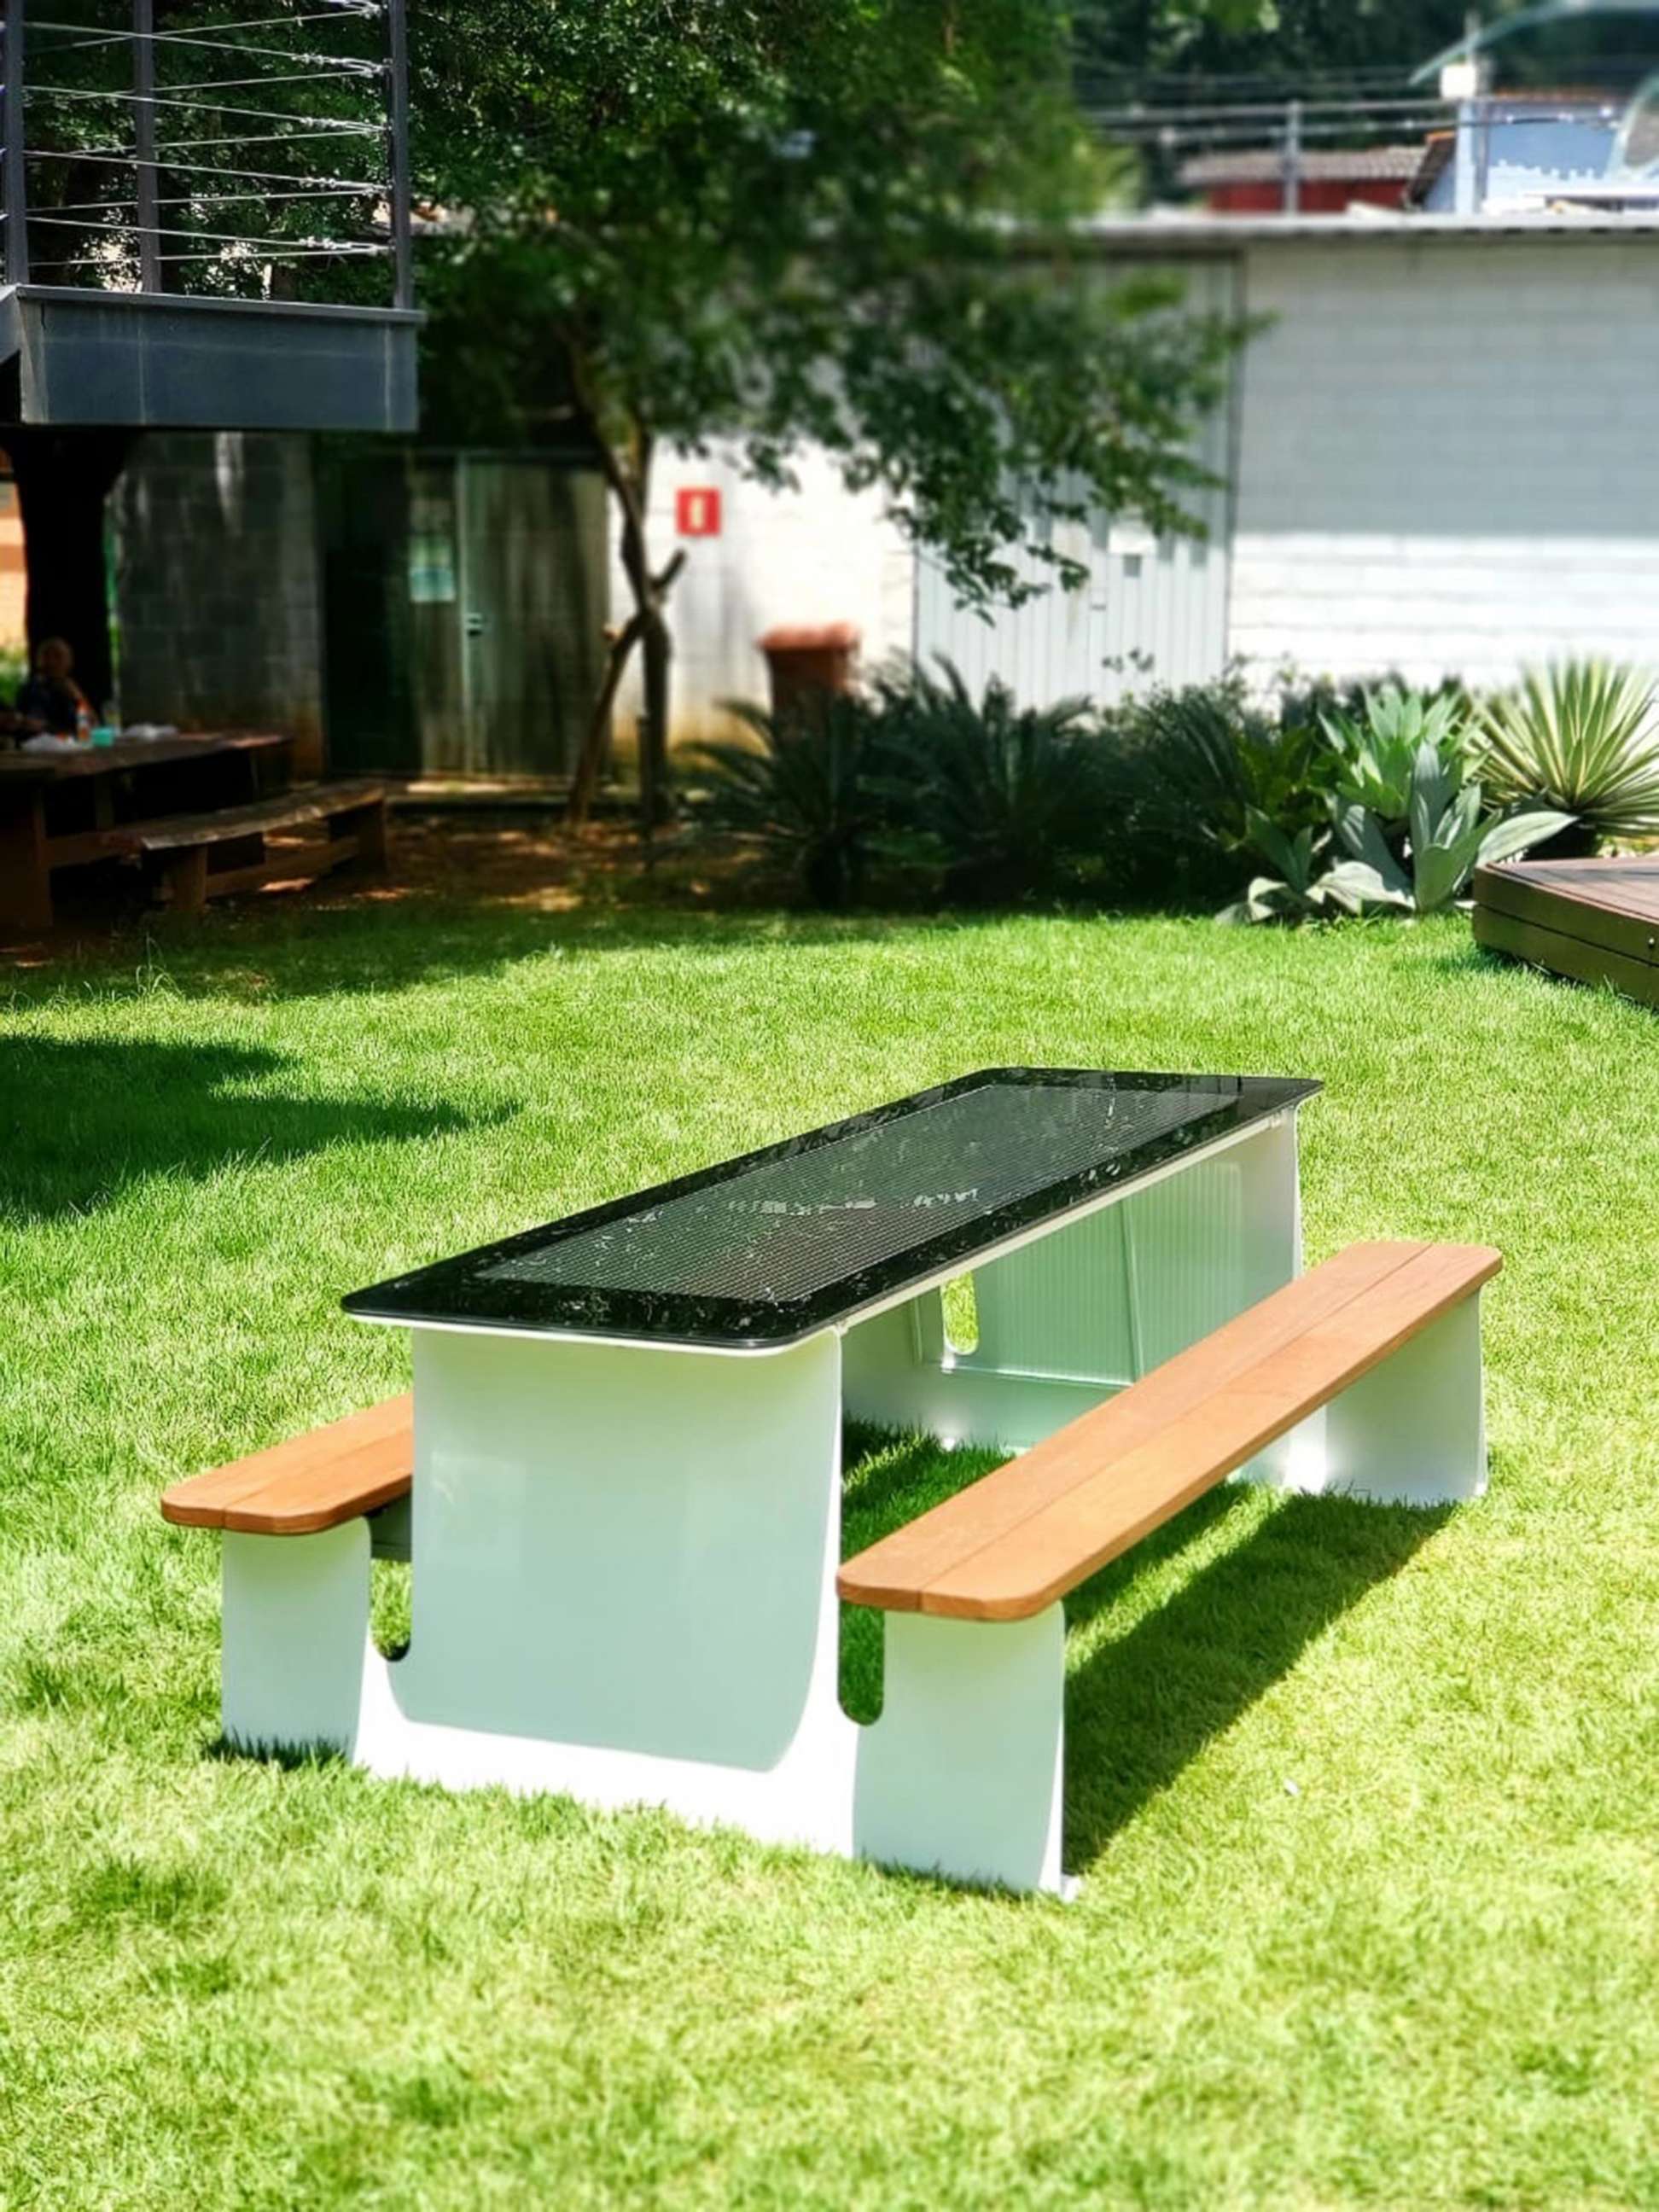 PHOTO: GO-OPV's ORENgE solar power technology is installed on an outdoor table.